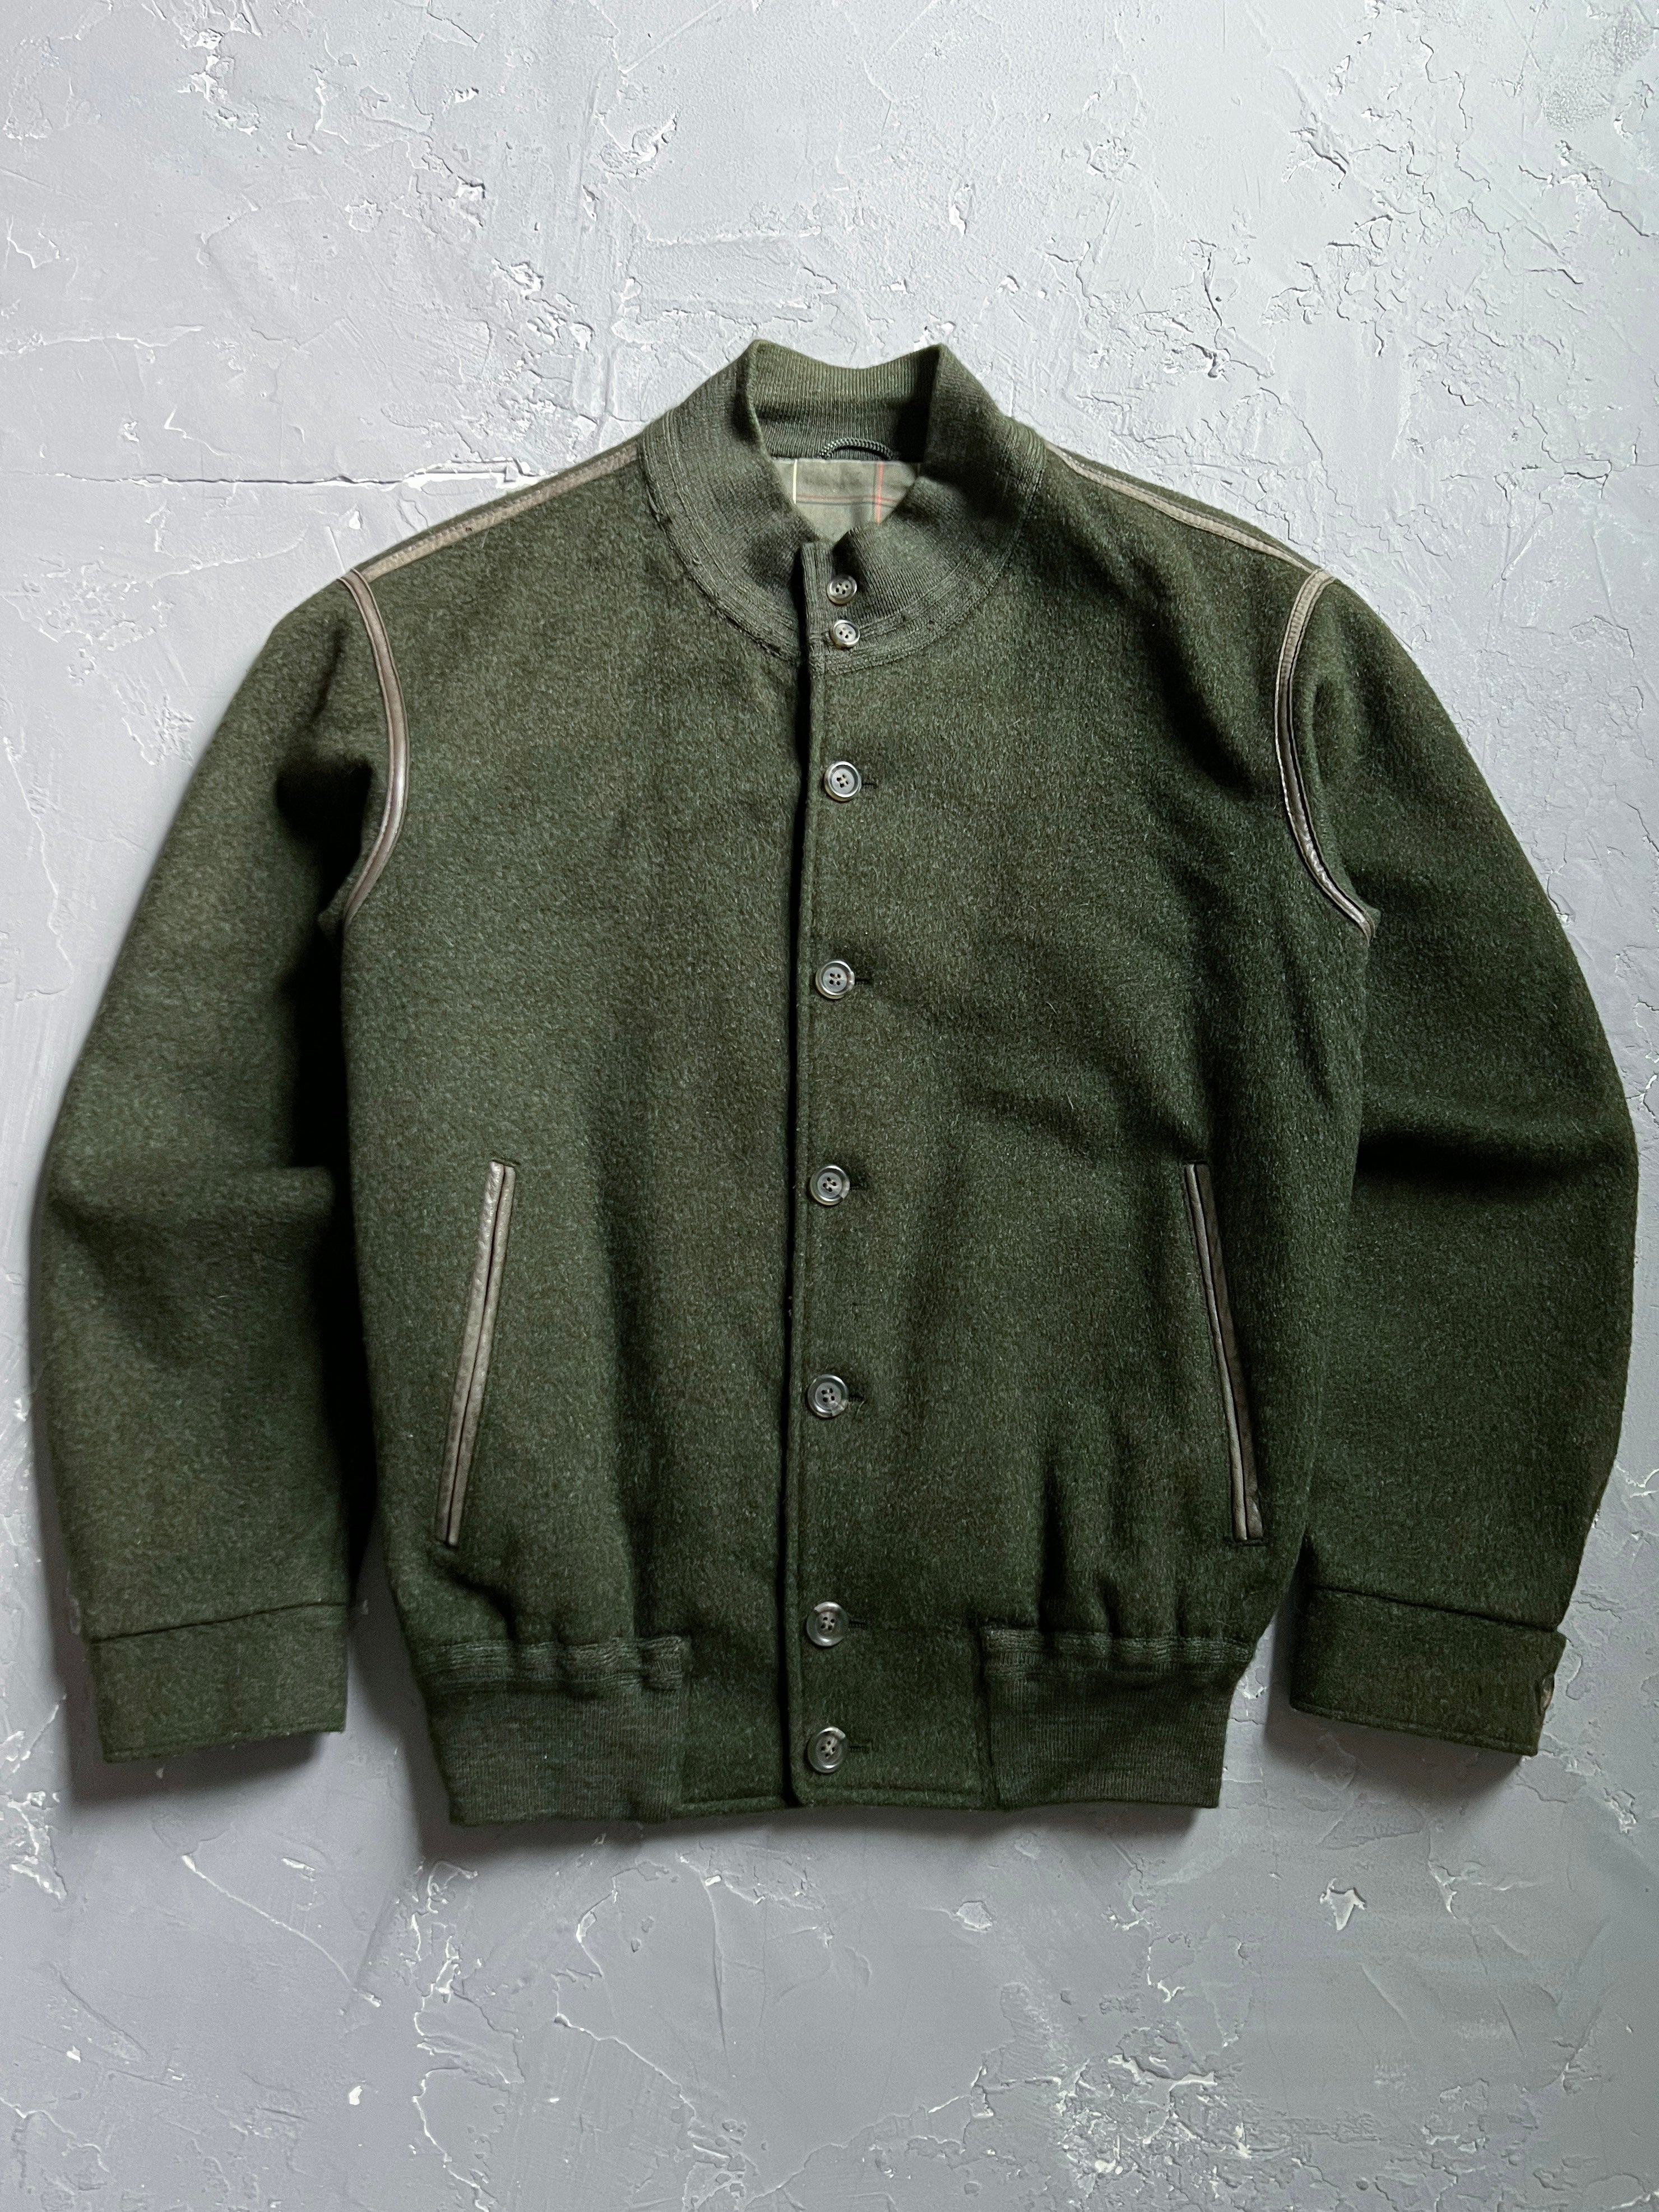 1980s Olive Green Wool Jacket [M]